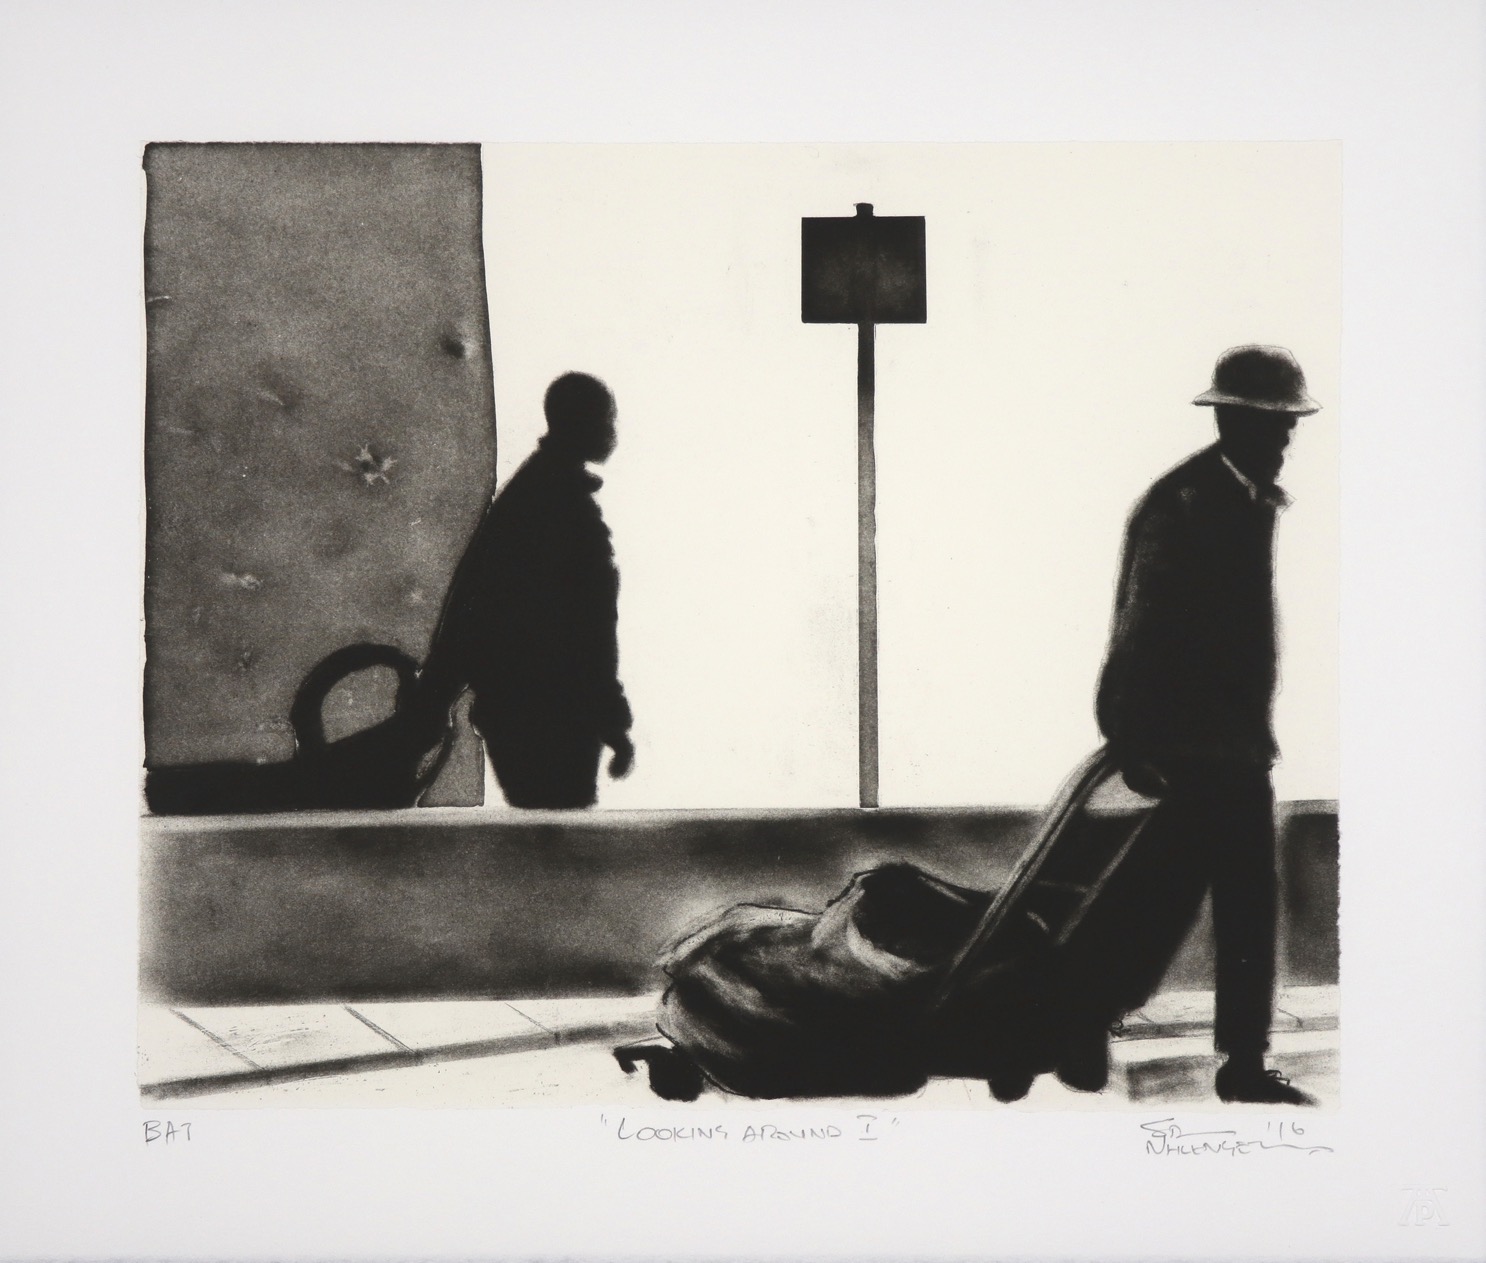 A suite of Lithographs by Sam Nhlengethwa that look at self-employed waste pickers who are unsung environmental heros.